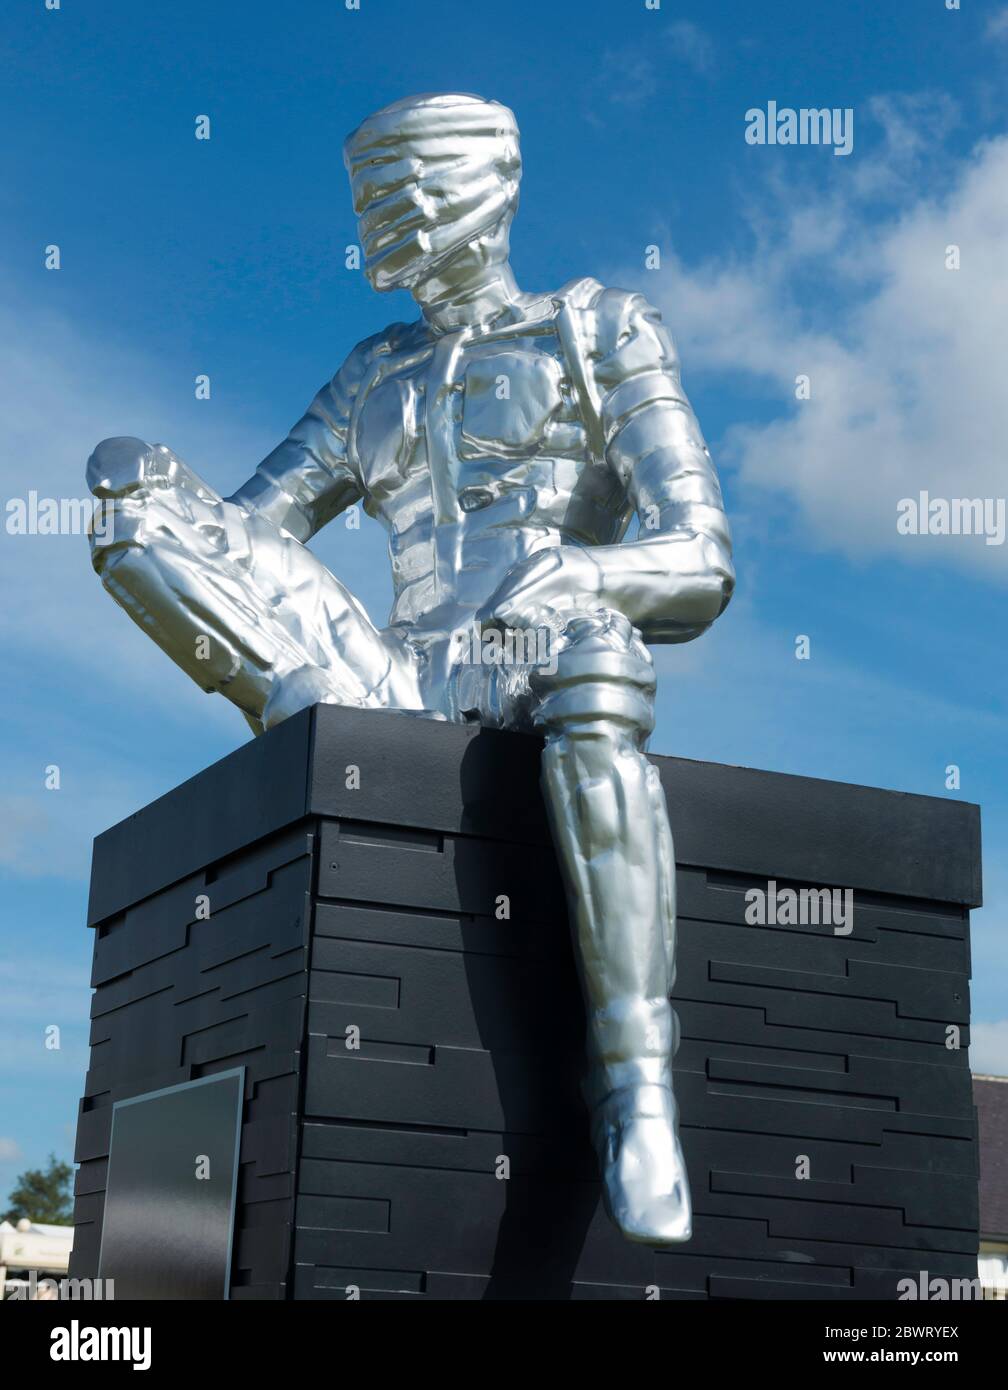 The Steel Man, a 2m maquette for a proposed landmark sculpture by Steve Medhi on display at the Great Yorkshire Show Stock Photo